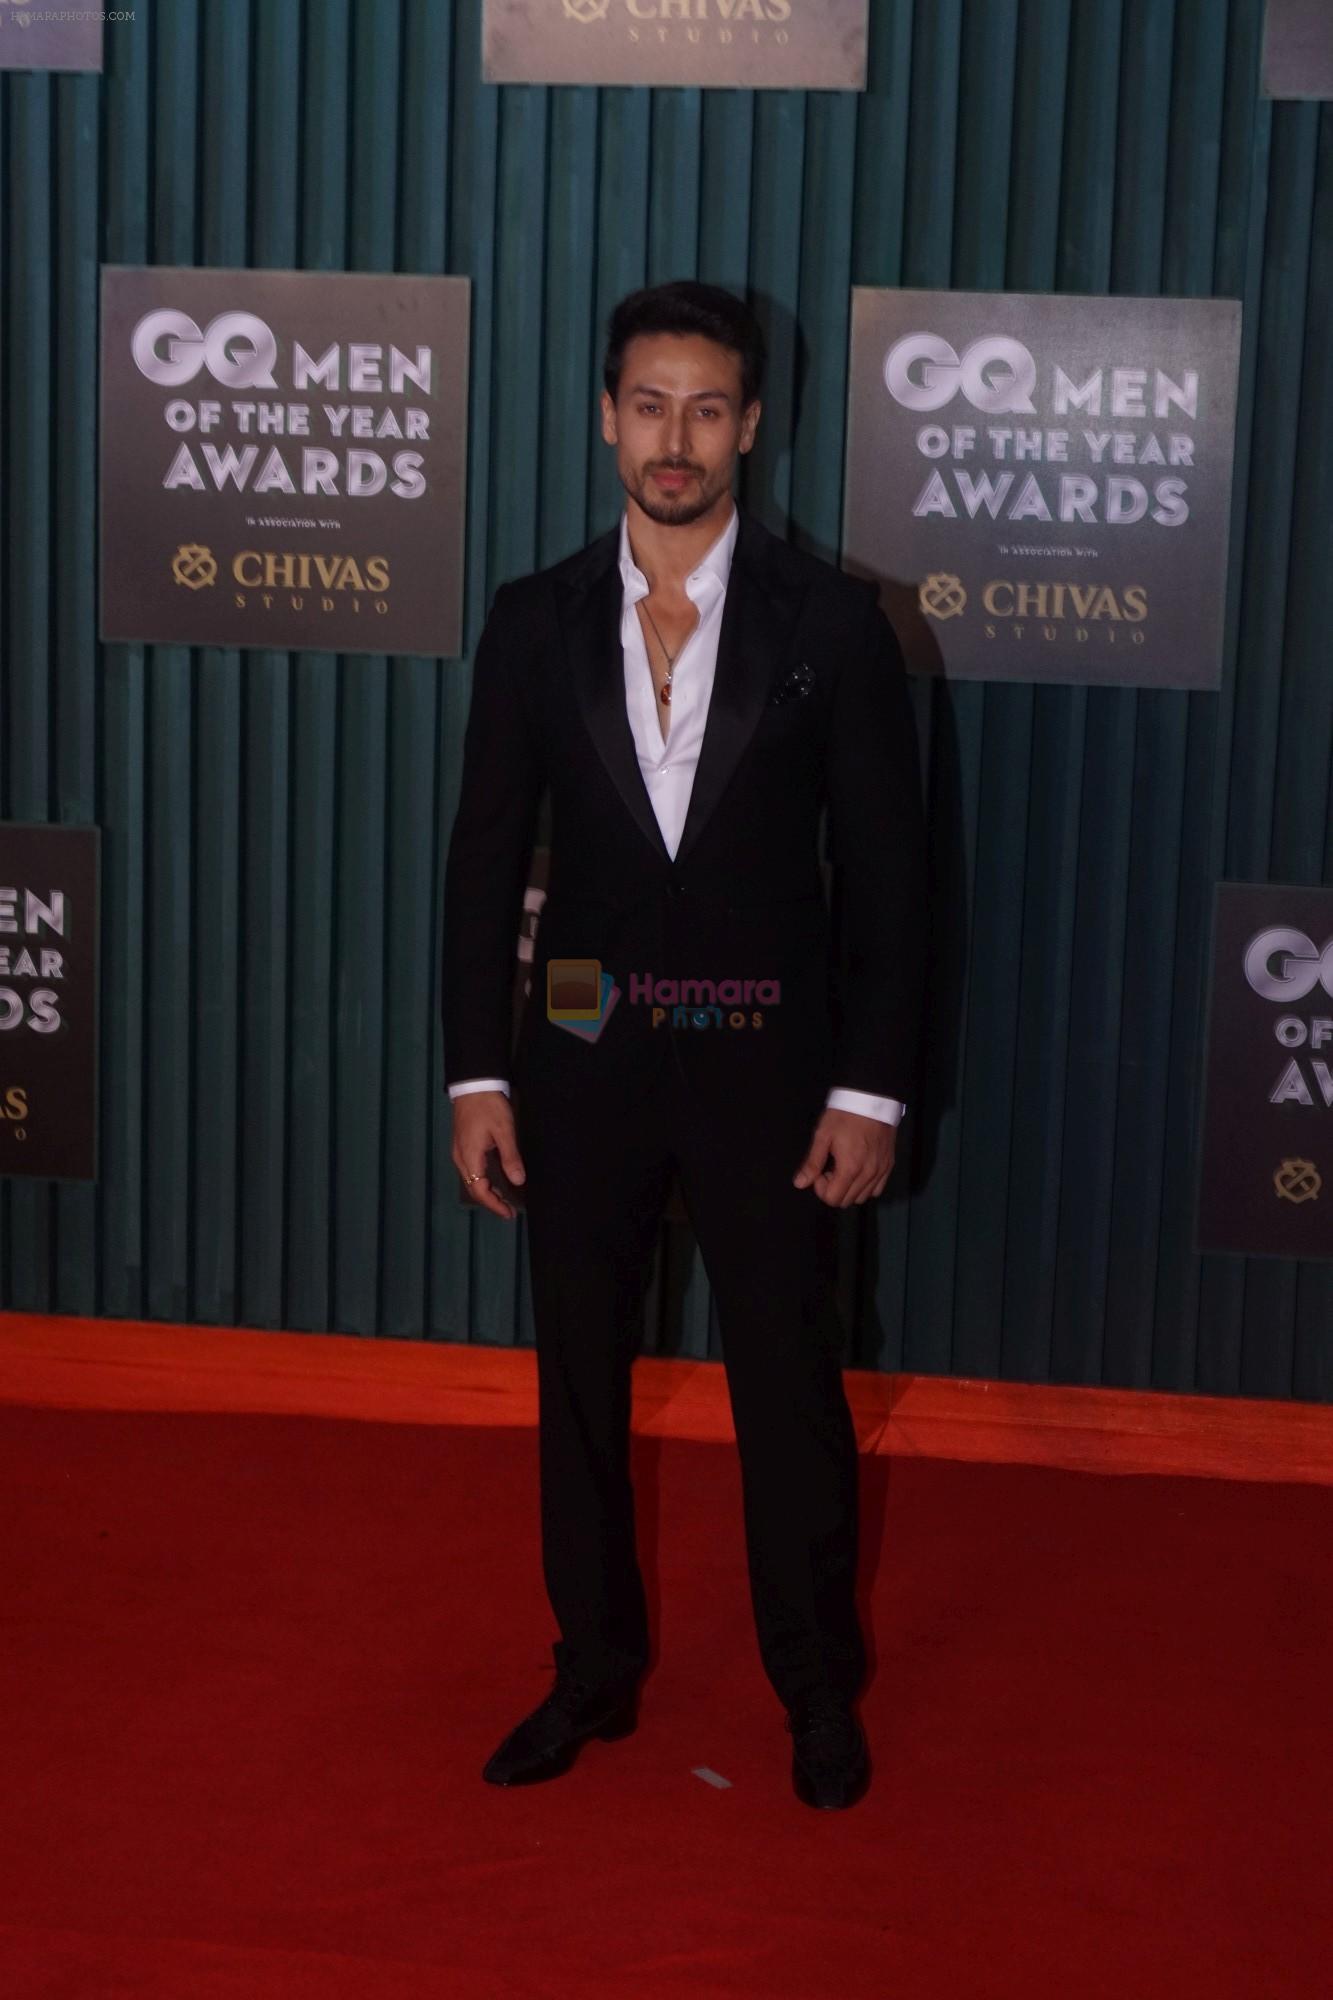 Tiger Shroff at GQ Men of the Year Awards 2018 on 27th Sept 2018